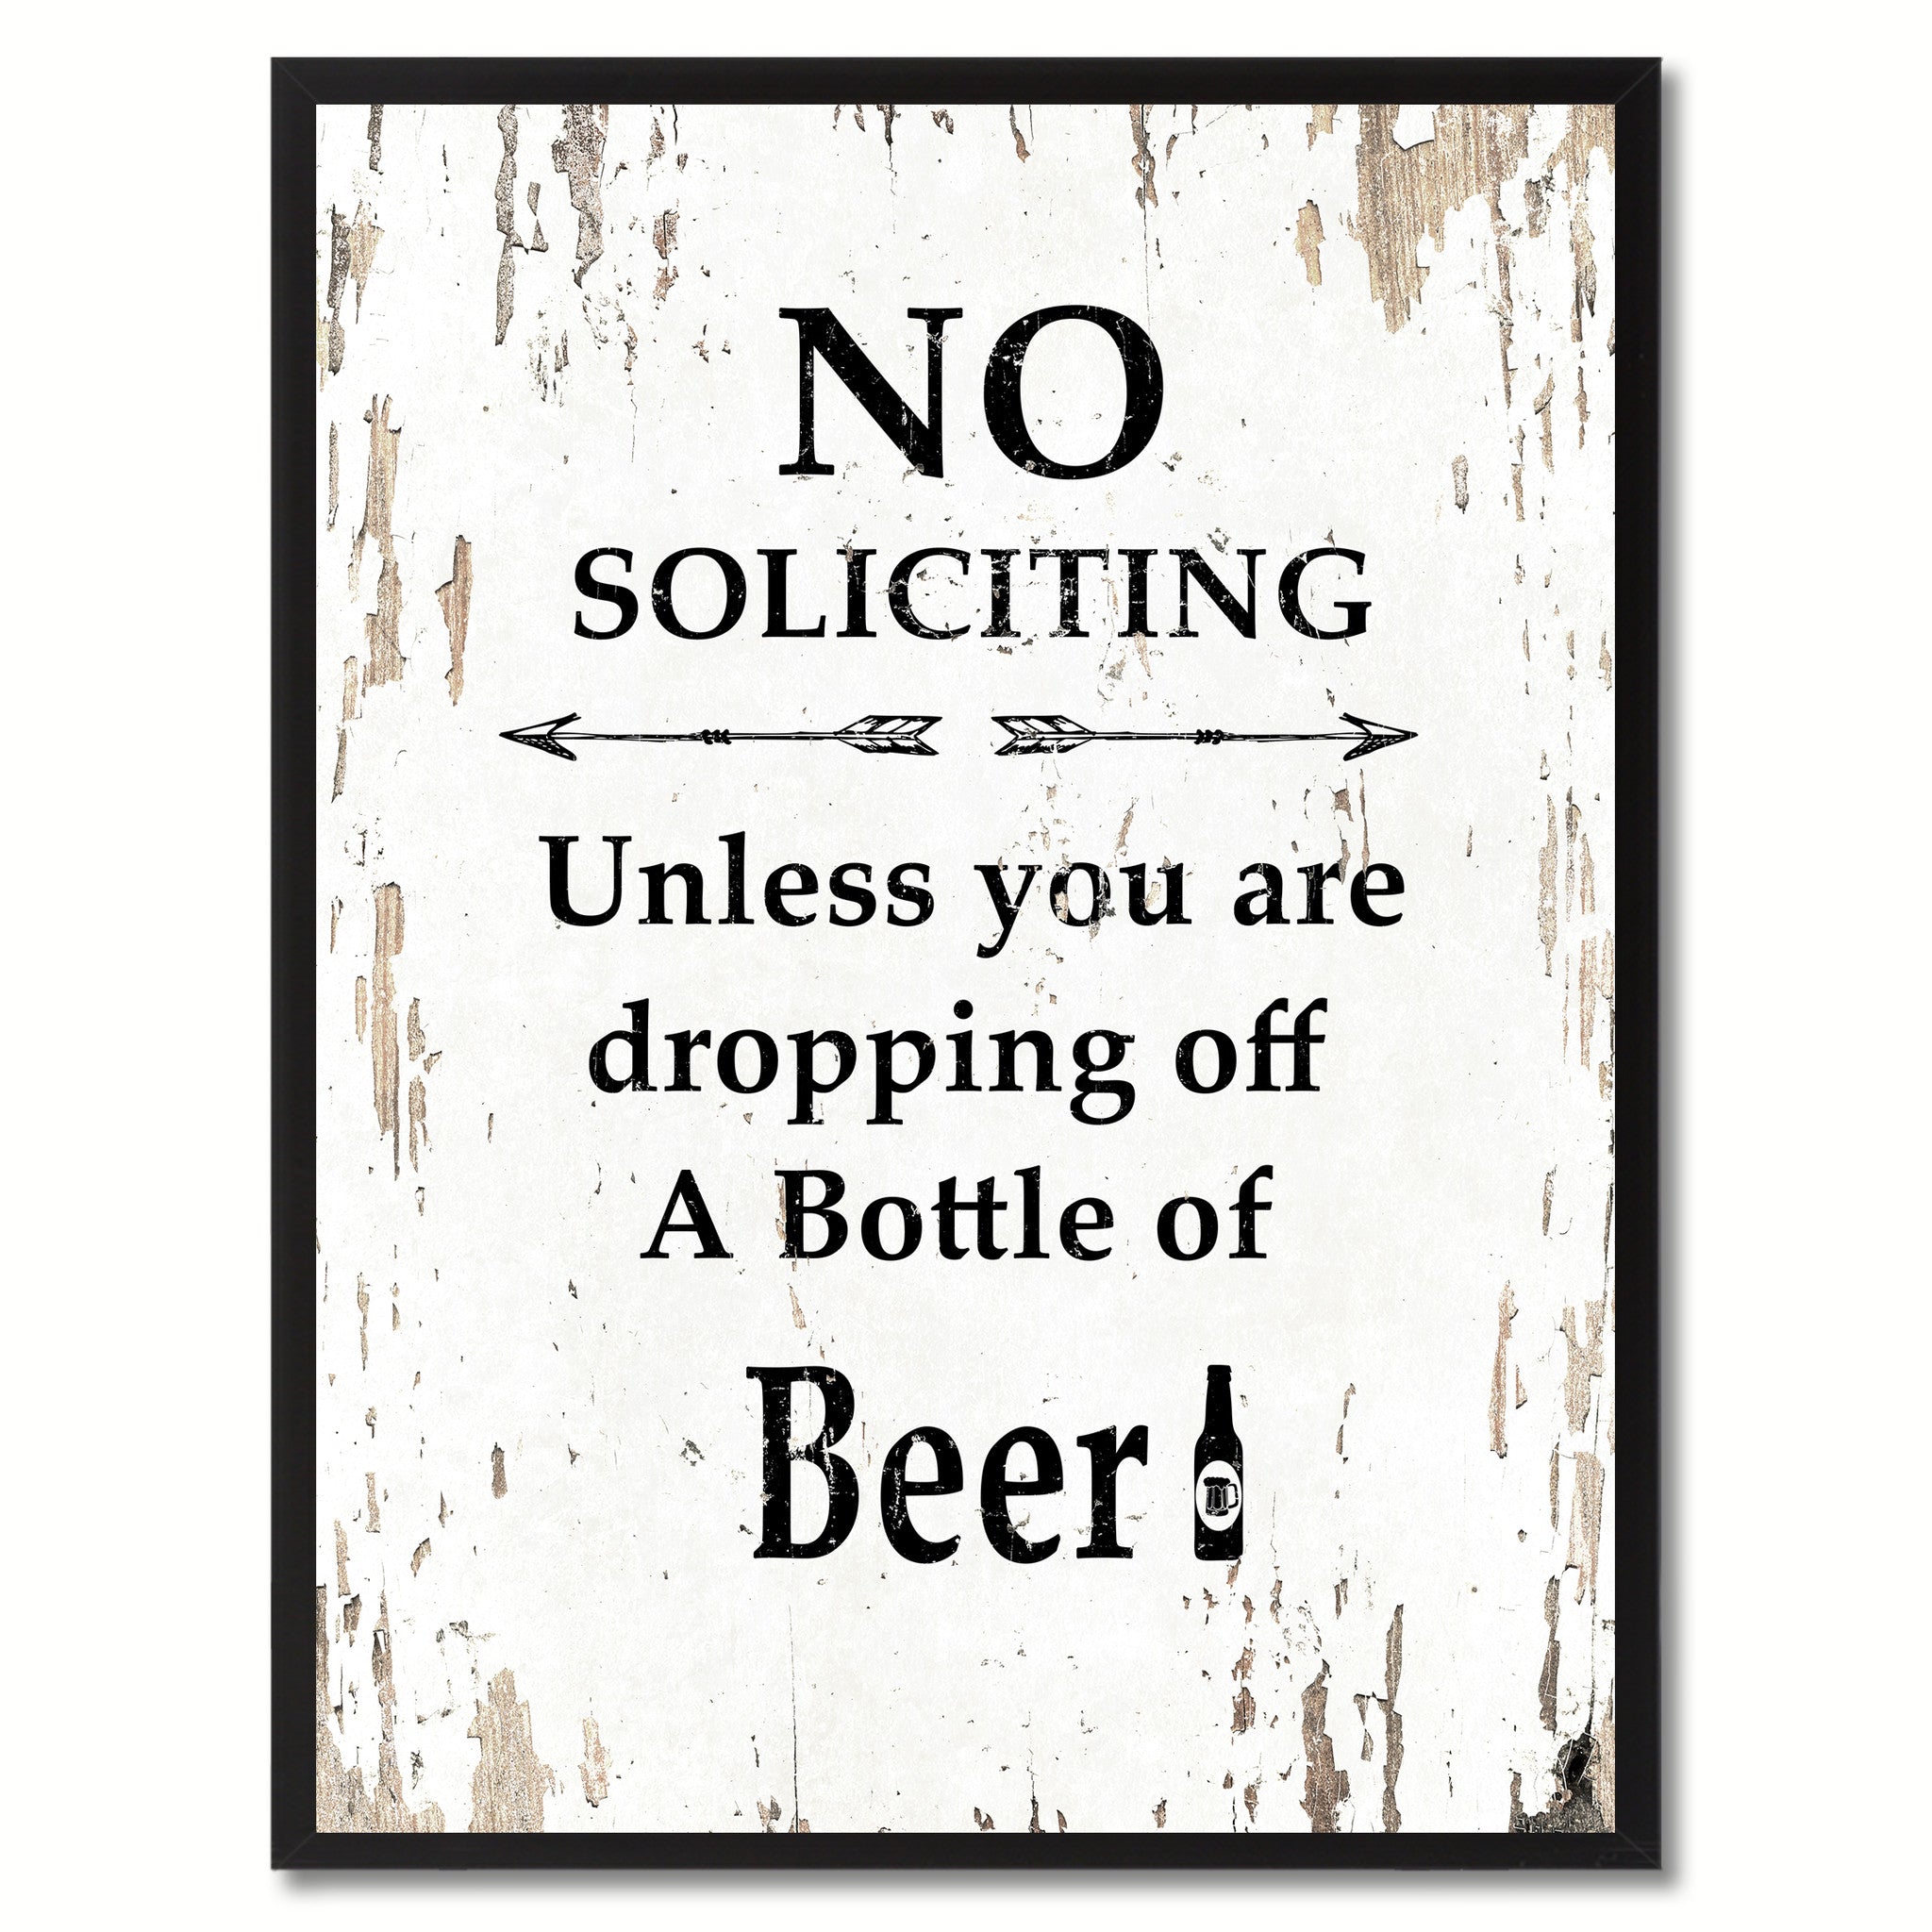 No Soliciting Unless You Are Dropping Off A Bottle Of Beer  Saying Canvas Print, Black Picture Frame Home Decor Wall Art Gifts